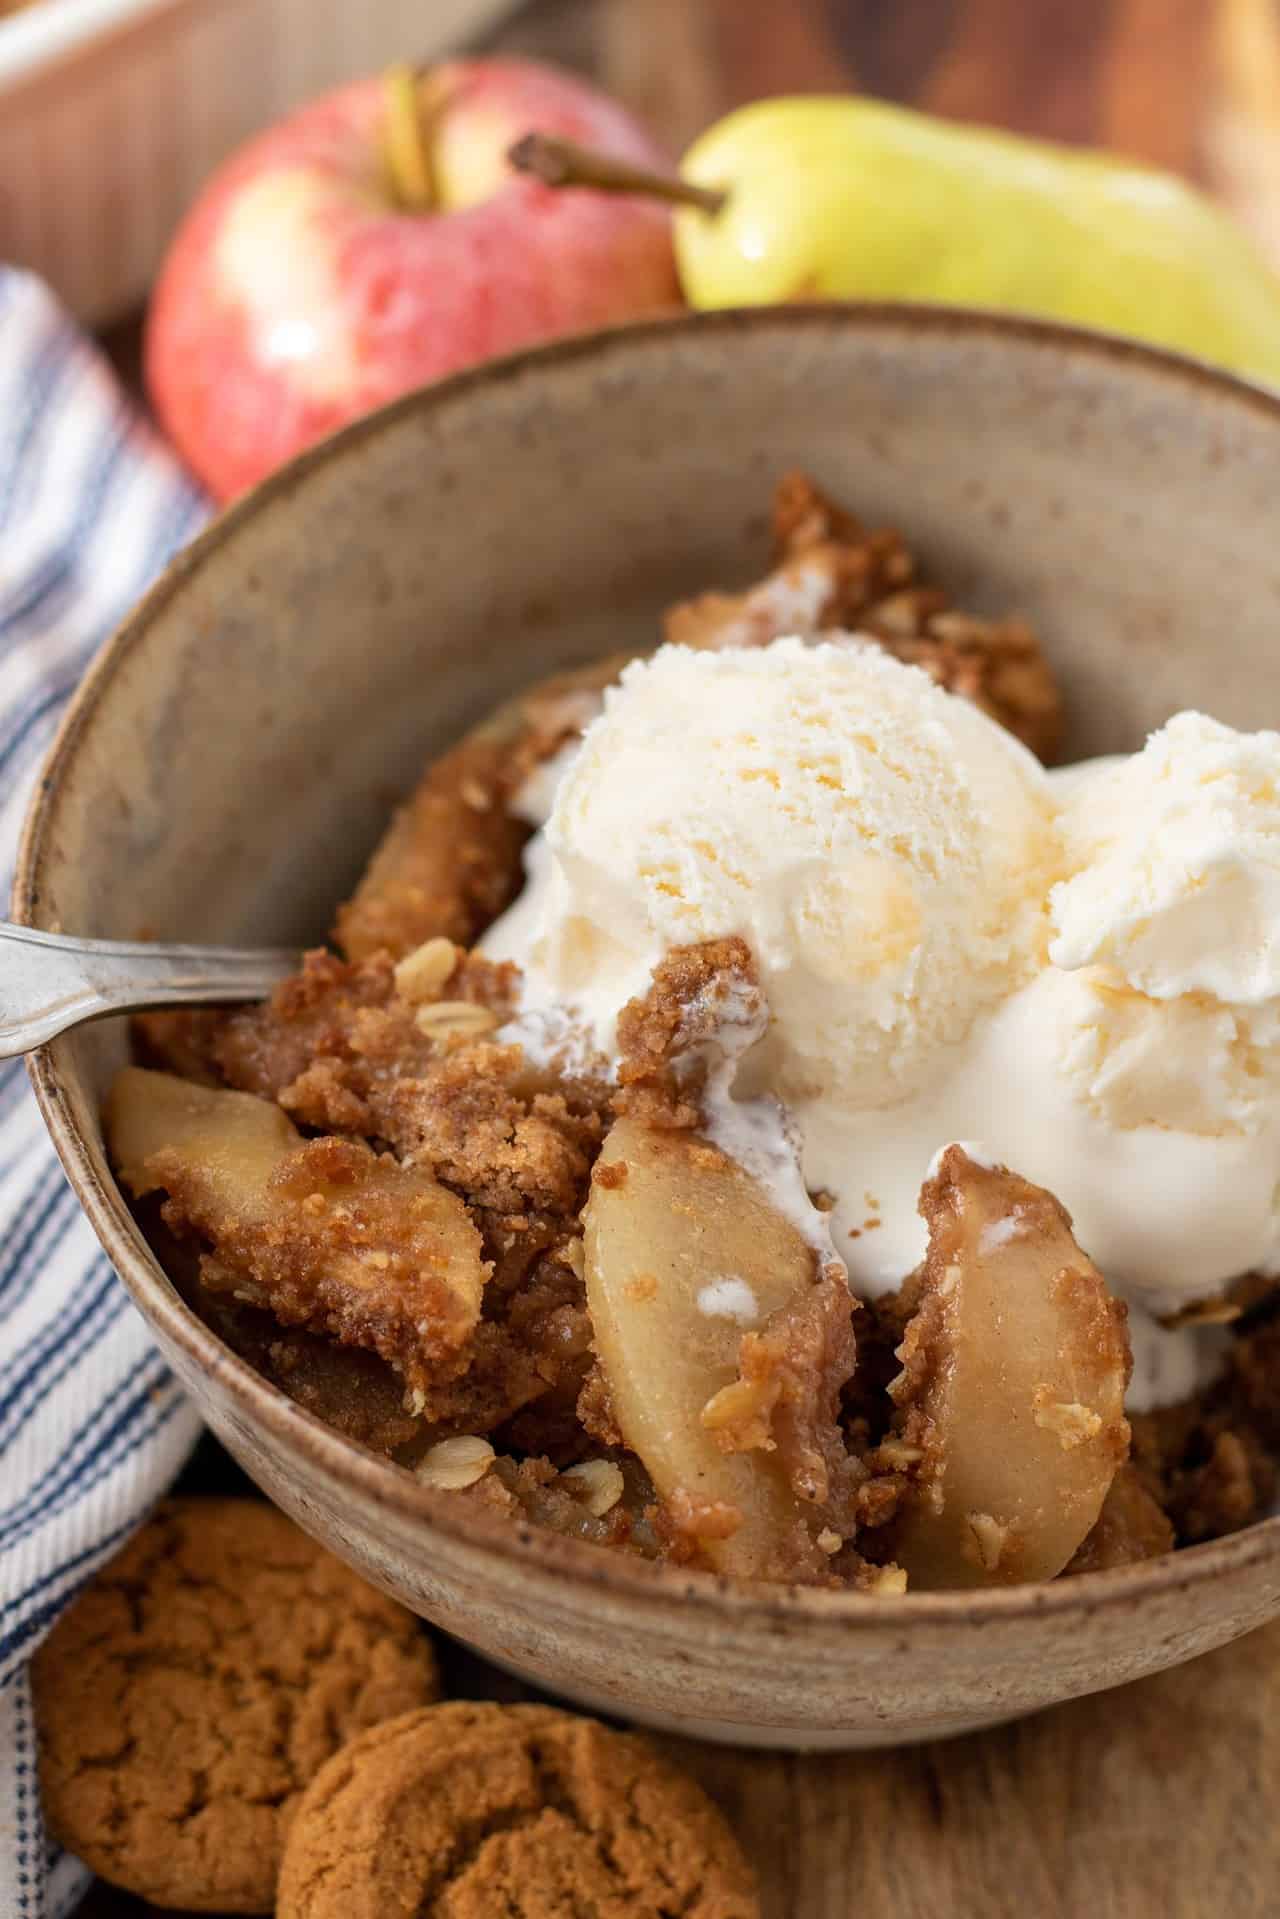 A brown speckled bowl with pear apple crisp that's topped with two scoops of vanilla ice cream. One of the scoops are slightly melted. There's a metal spoon sticking in the bowl. You can see two gingersnap cookies, a red apple and green pear in the background.